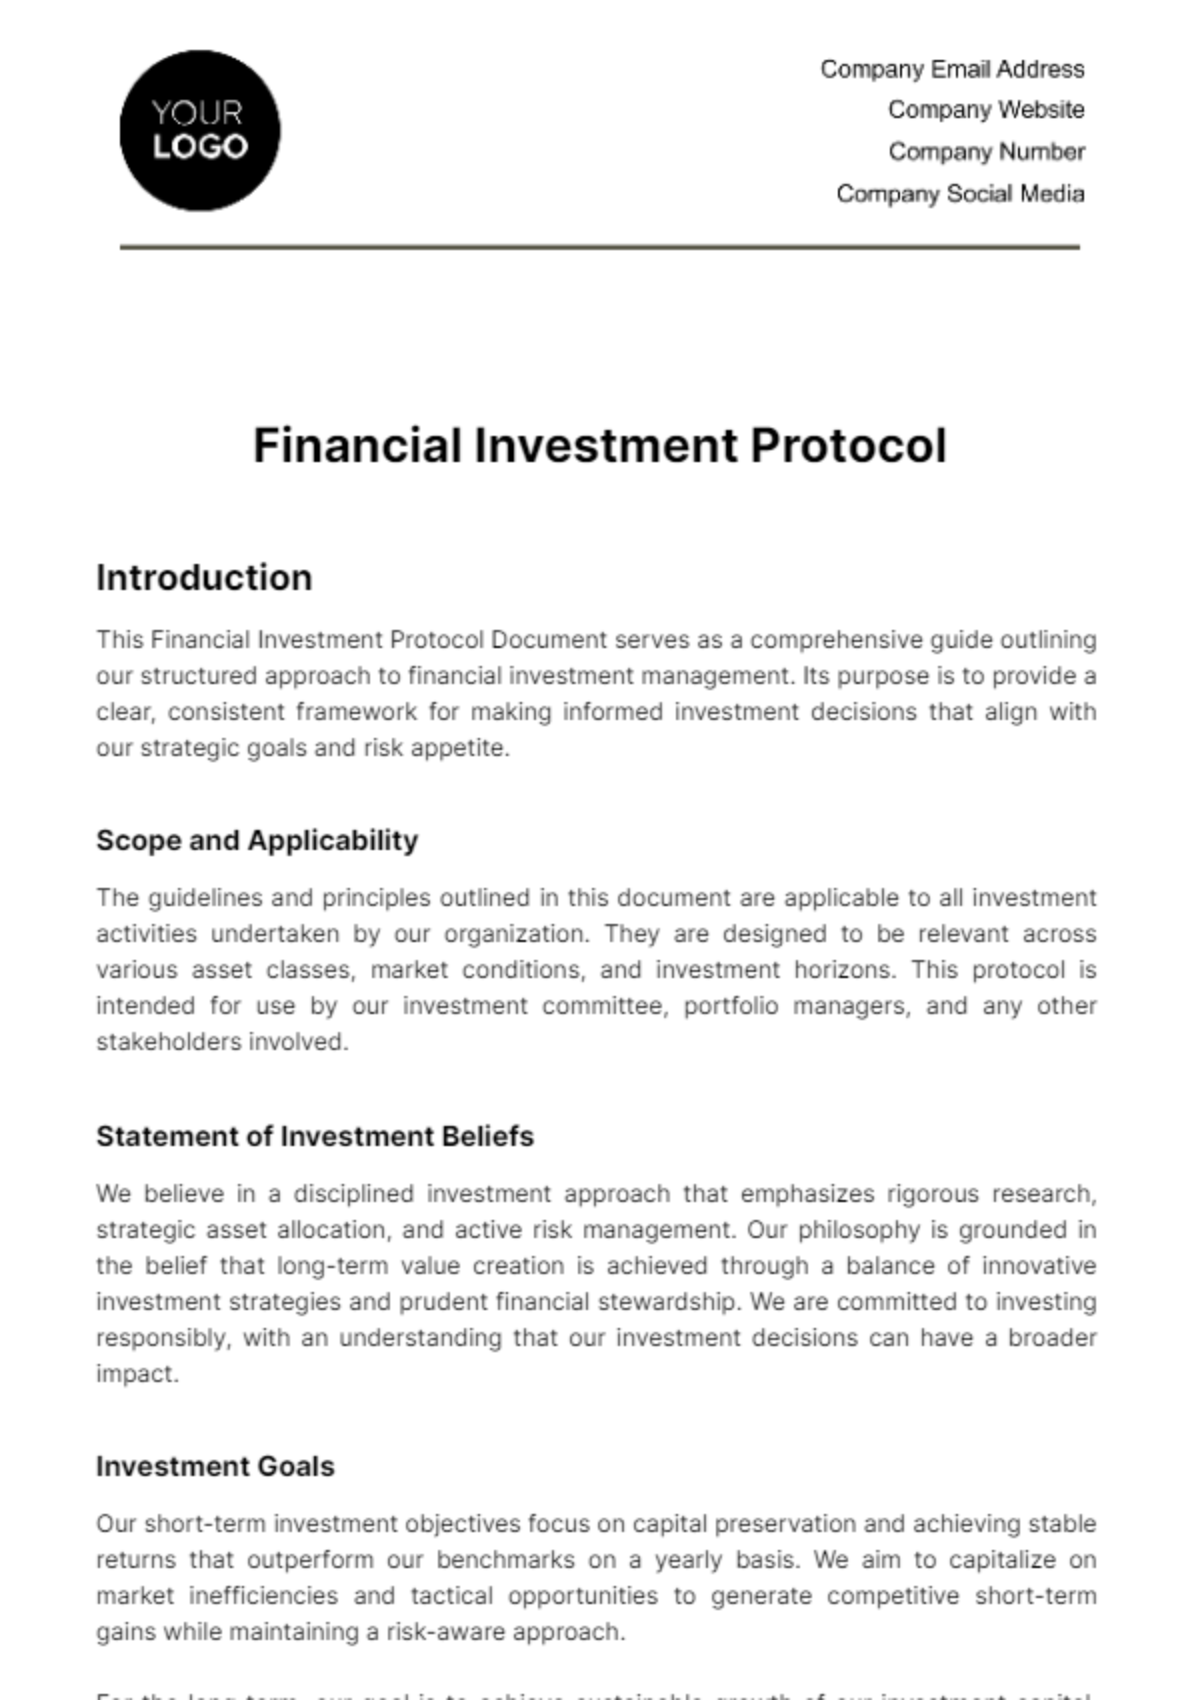 Financial Investment Protocol Template